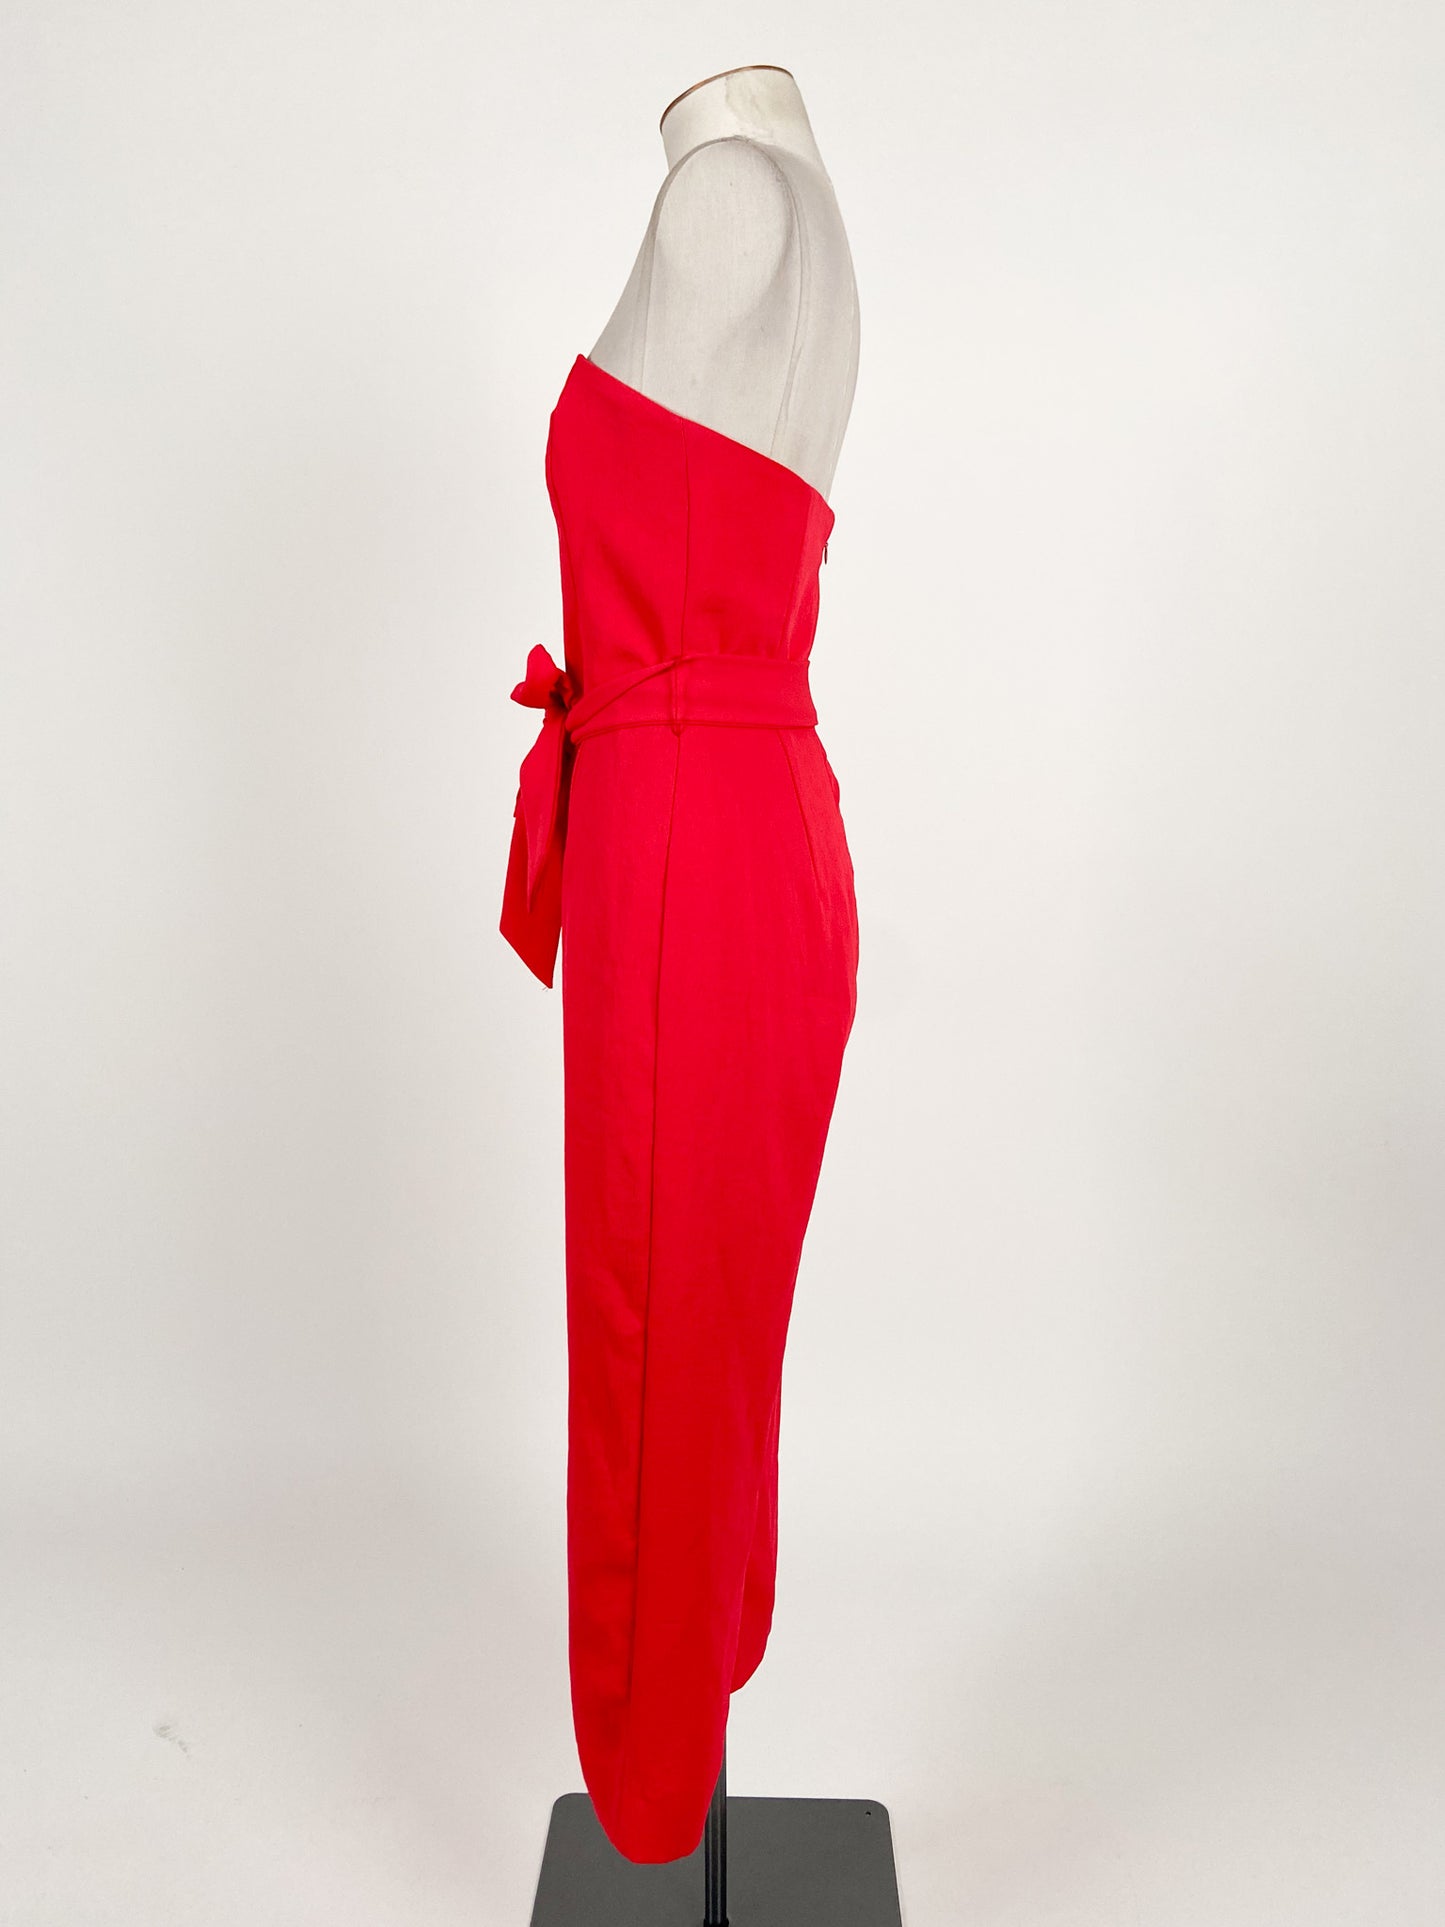 Kookai | Red Cocktail/Formal Jumpsuit | Size 8